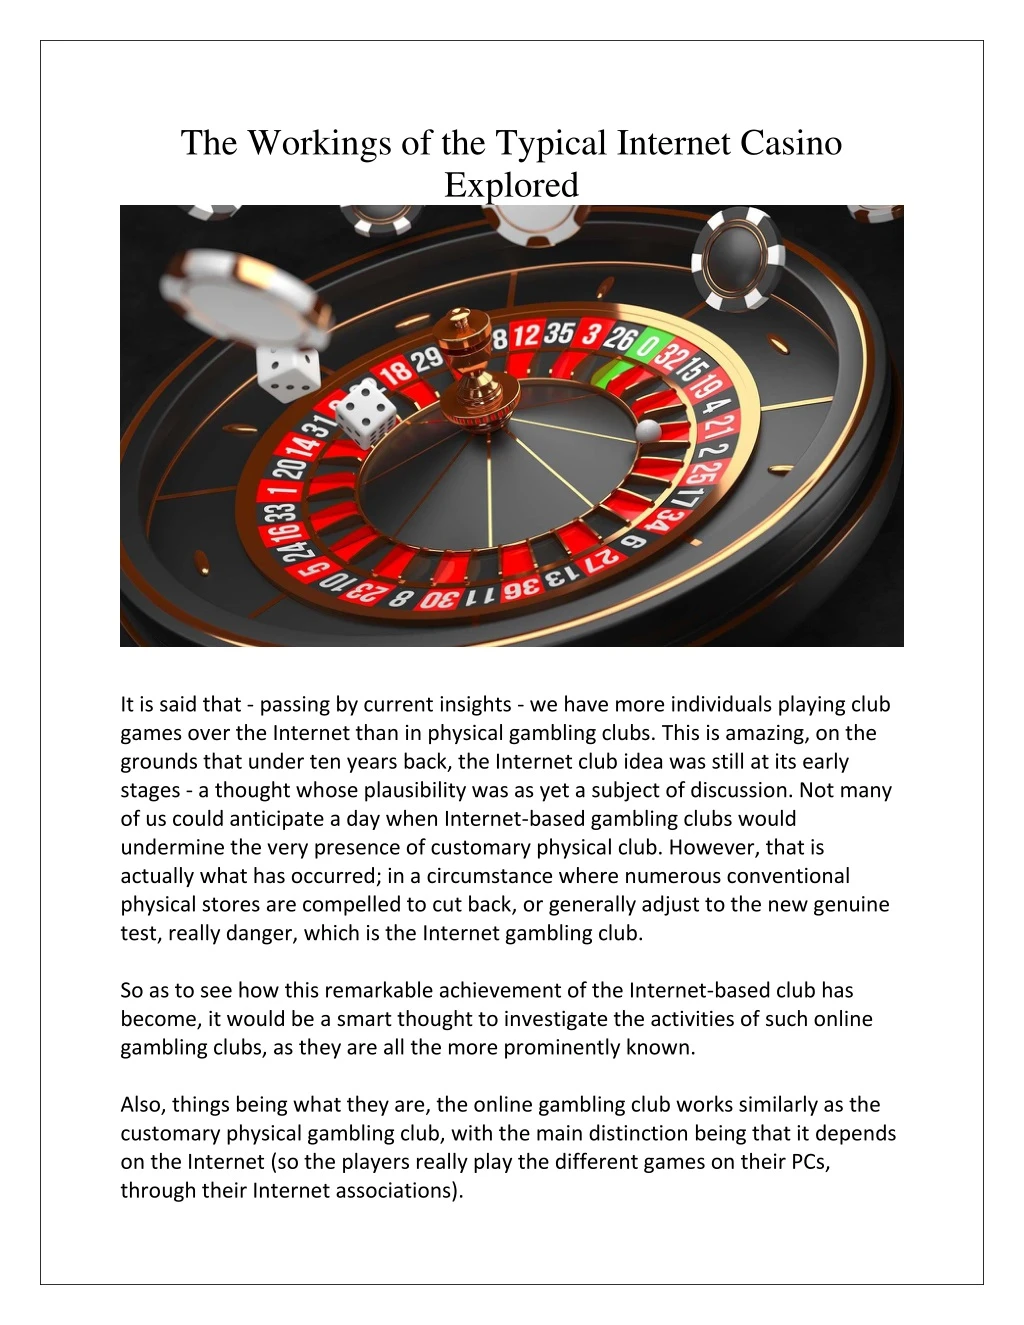 the workings of the typical internet casino